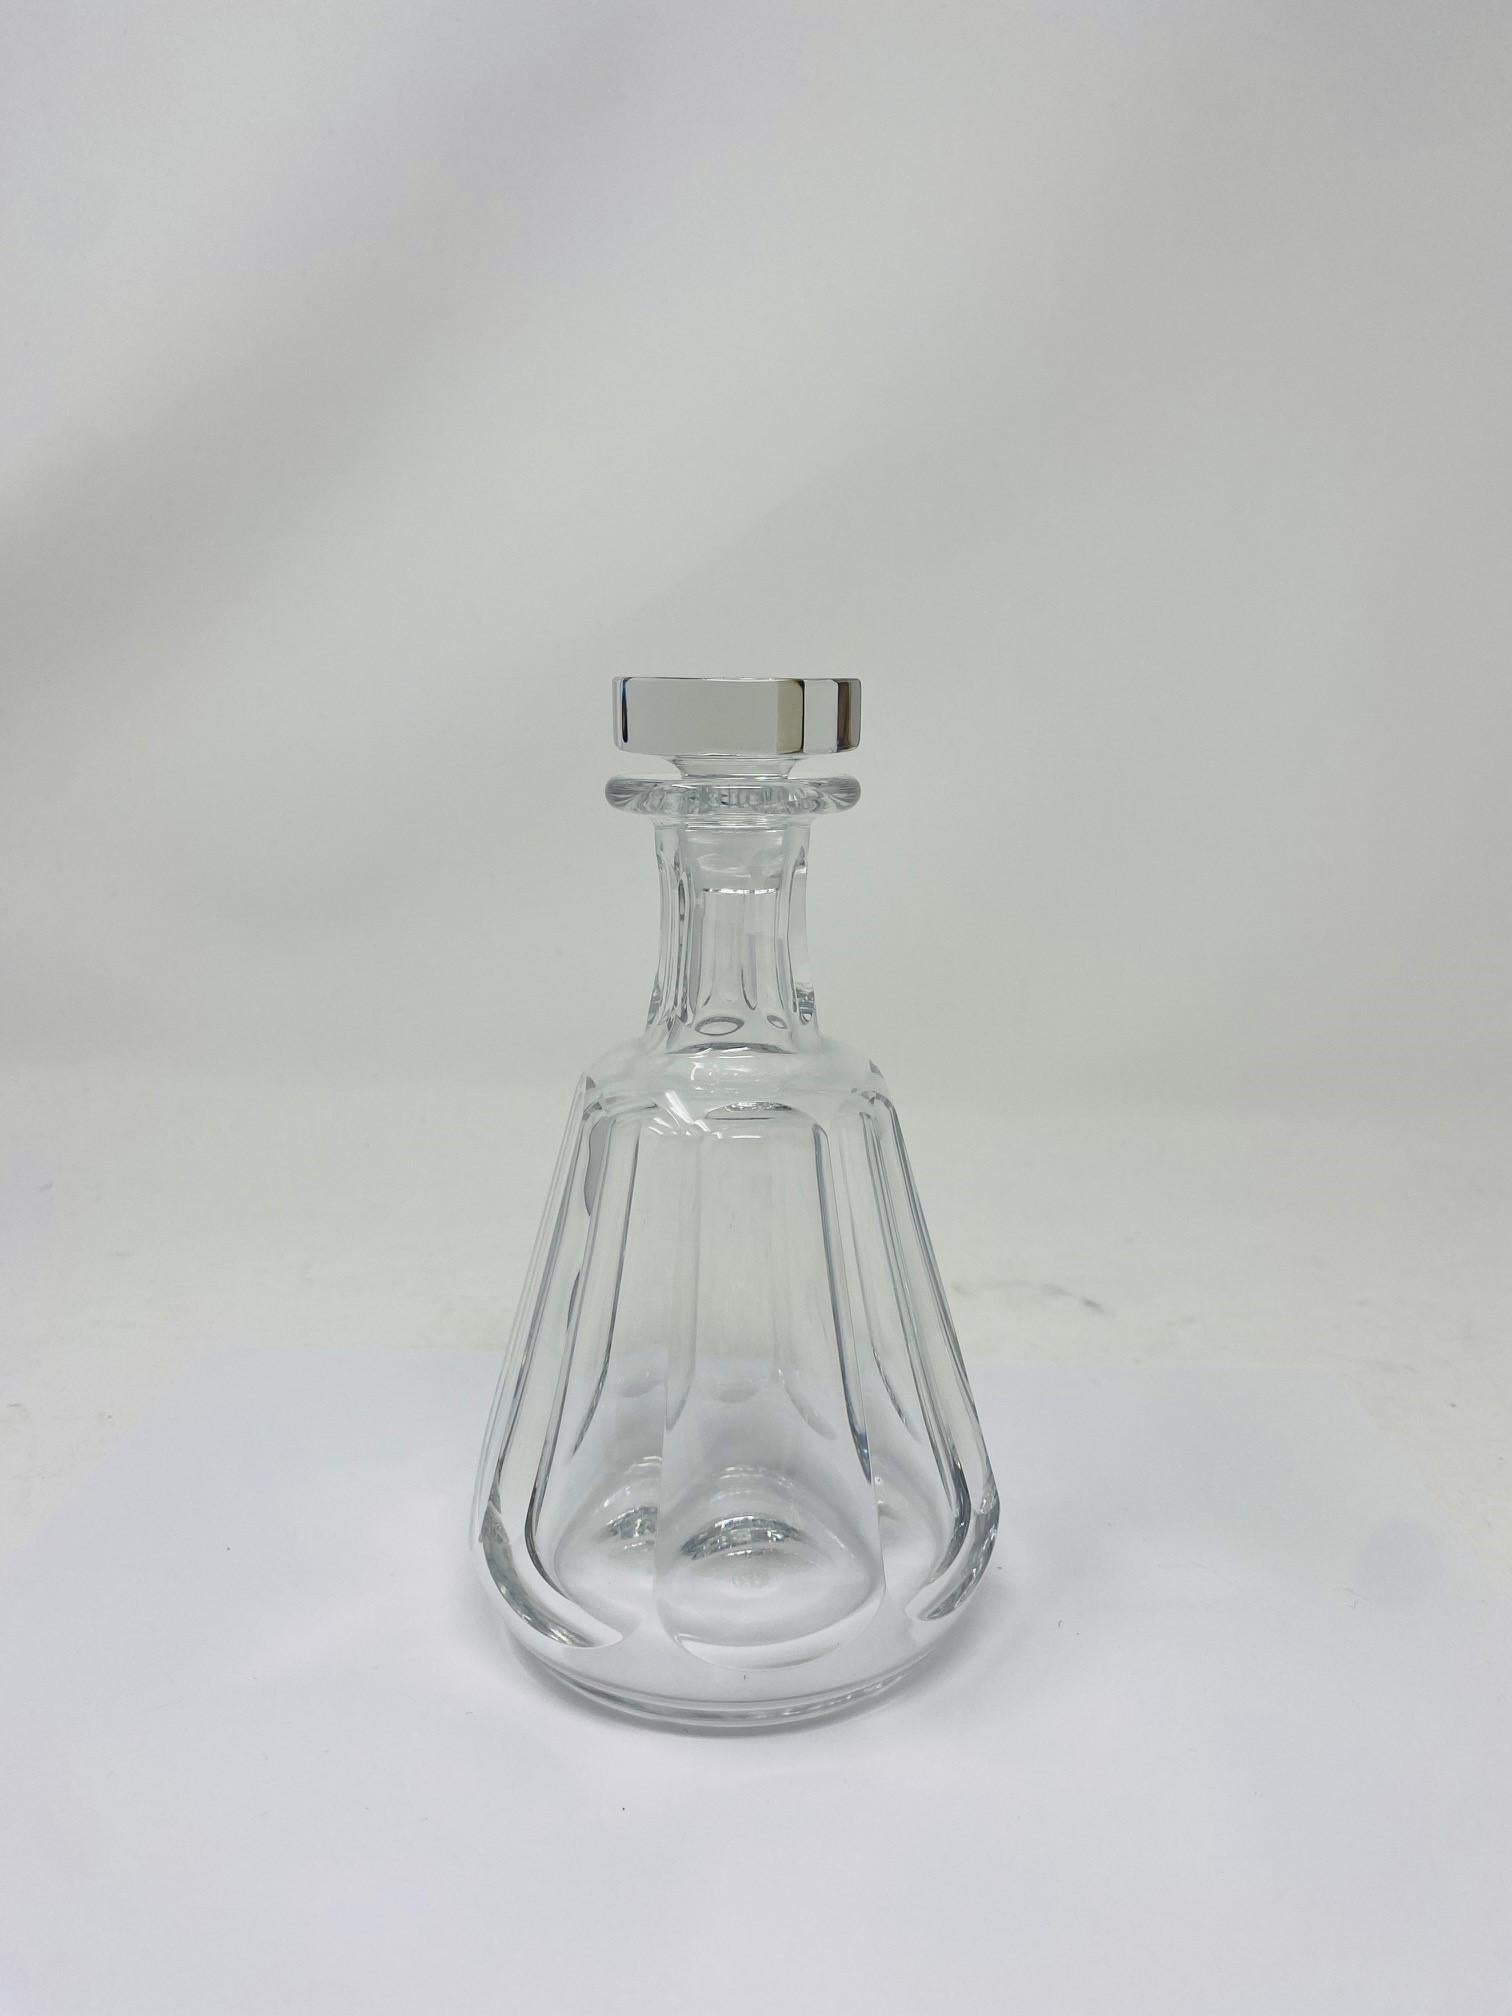 Beautiful and sleek decanter by Baccarat.  Created in a smaller scale, this is a beautiful piece that will hold your whiskeys/spirits in great style.  In great condition with a small fleabite in the stopper that is almost unnoticeable.  Stylish and